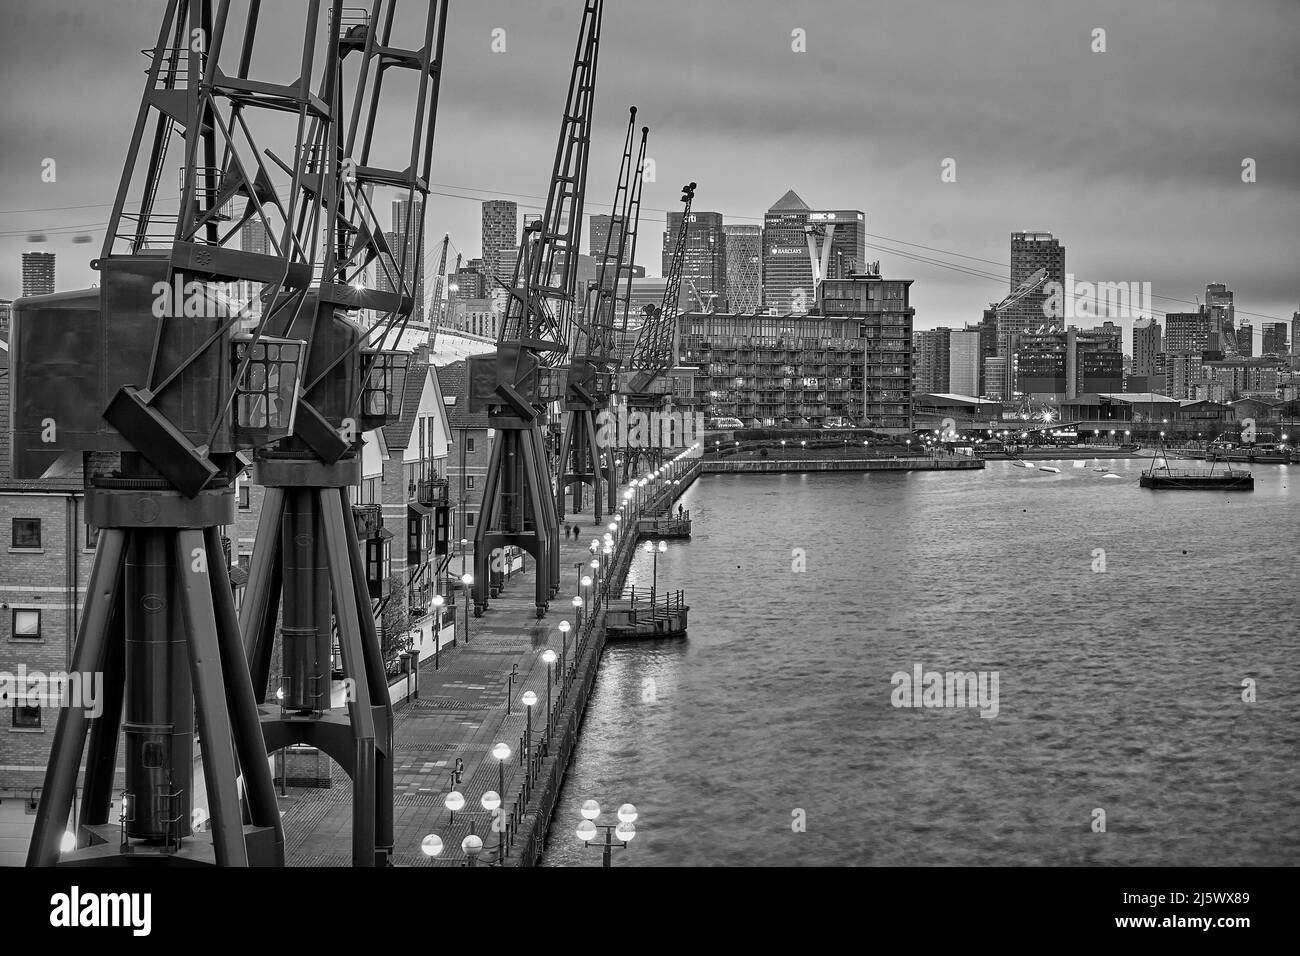 Royal Victoria Dock and Canary Wharf in the Distance, London Stock Photo